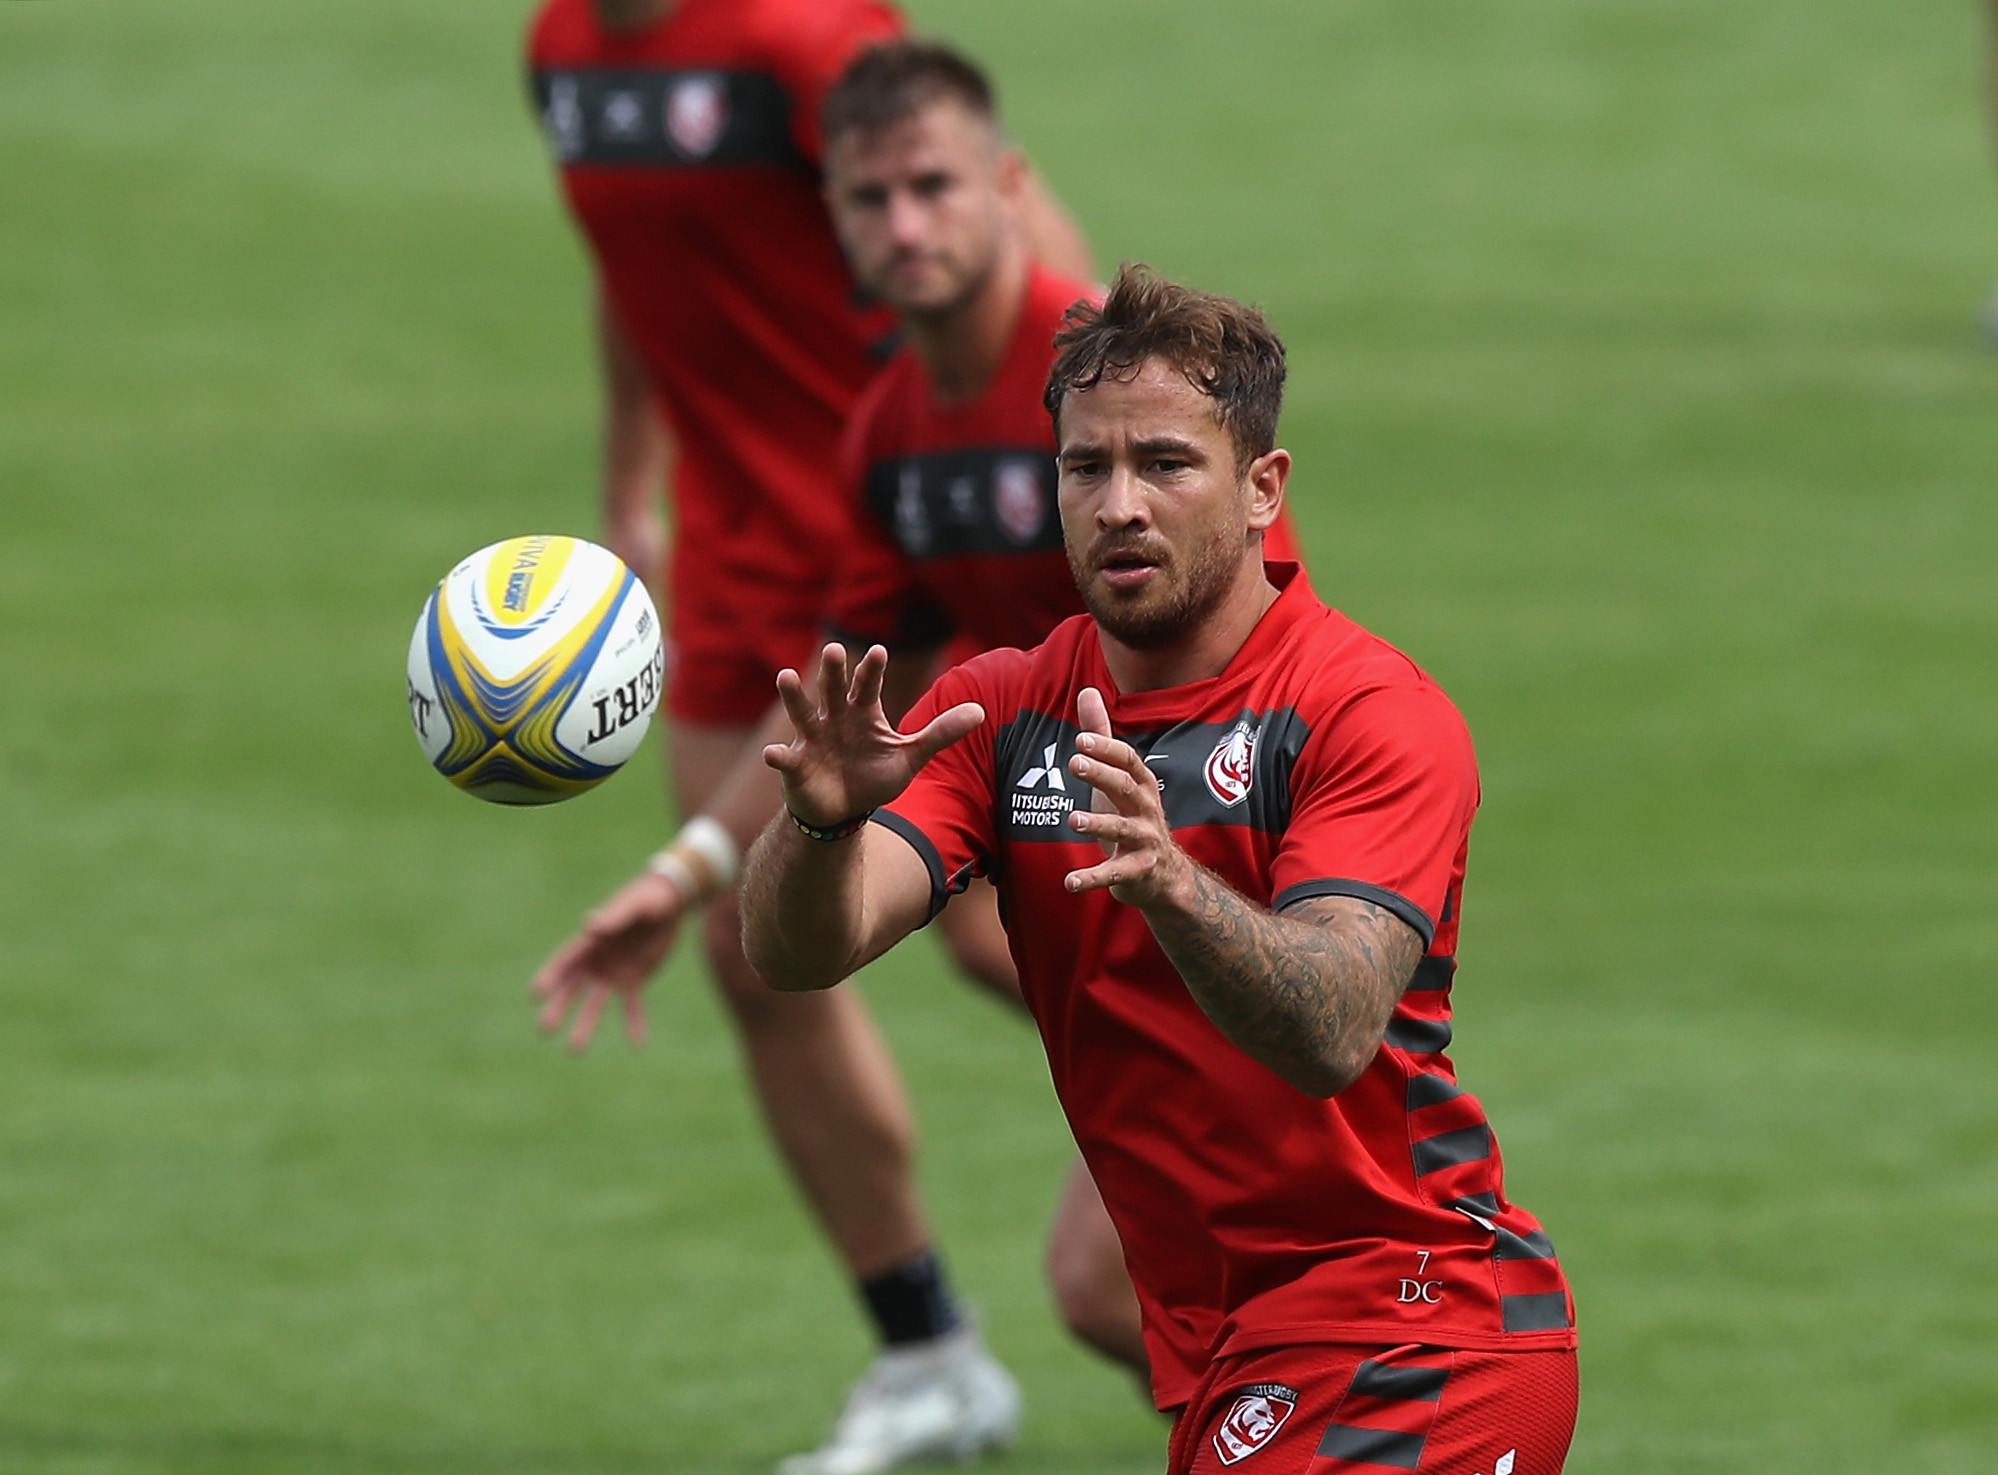 Danny Cipriani was arrested after an incident in Jersey ©Getty Images